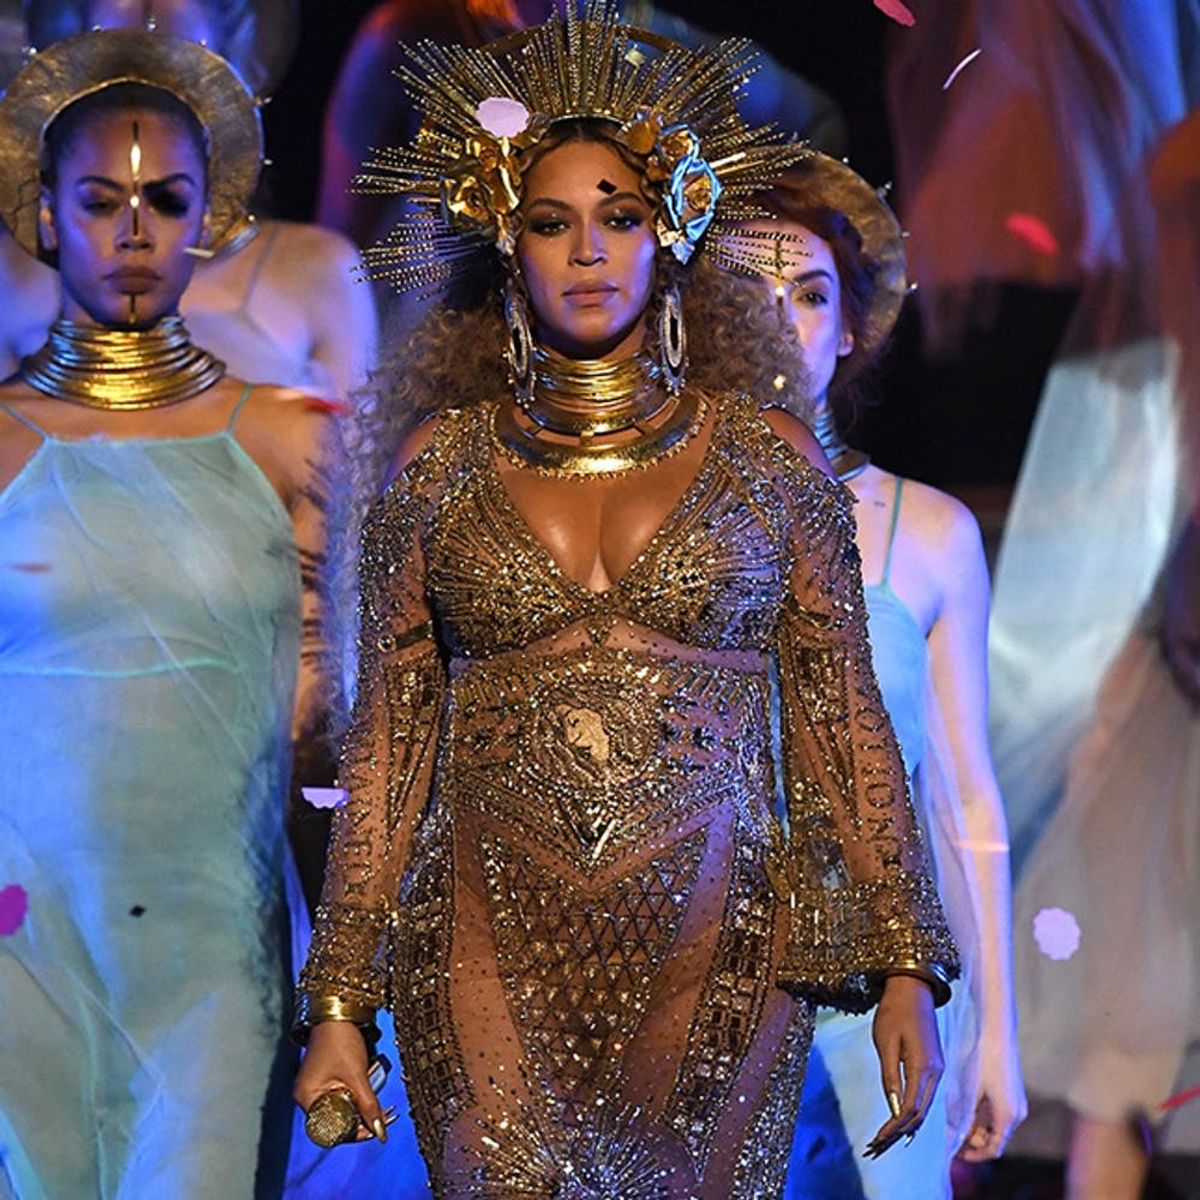 Beyonce’s Grammys Performance Is Basically Her Pregnancy Instagram Come to Life